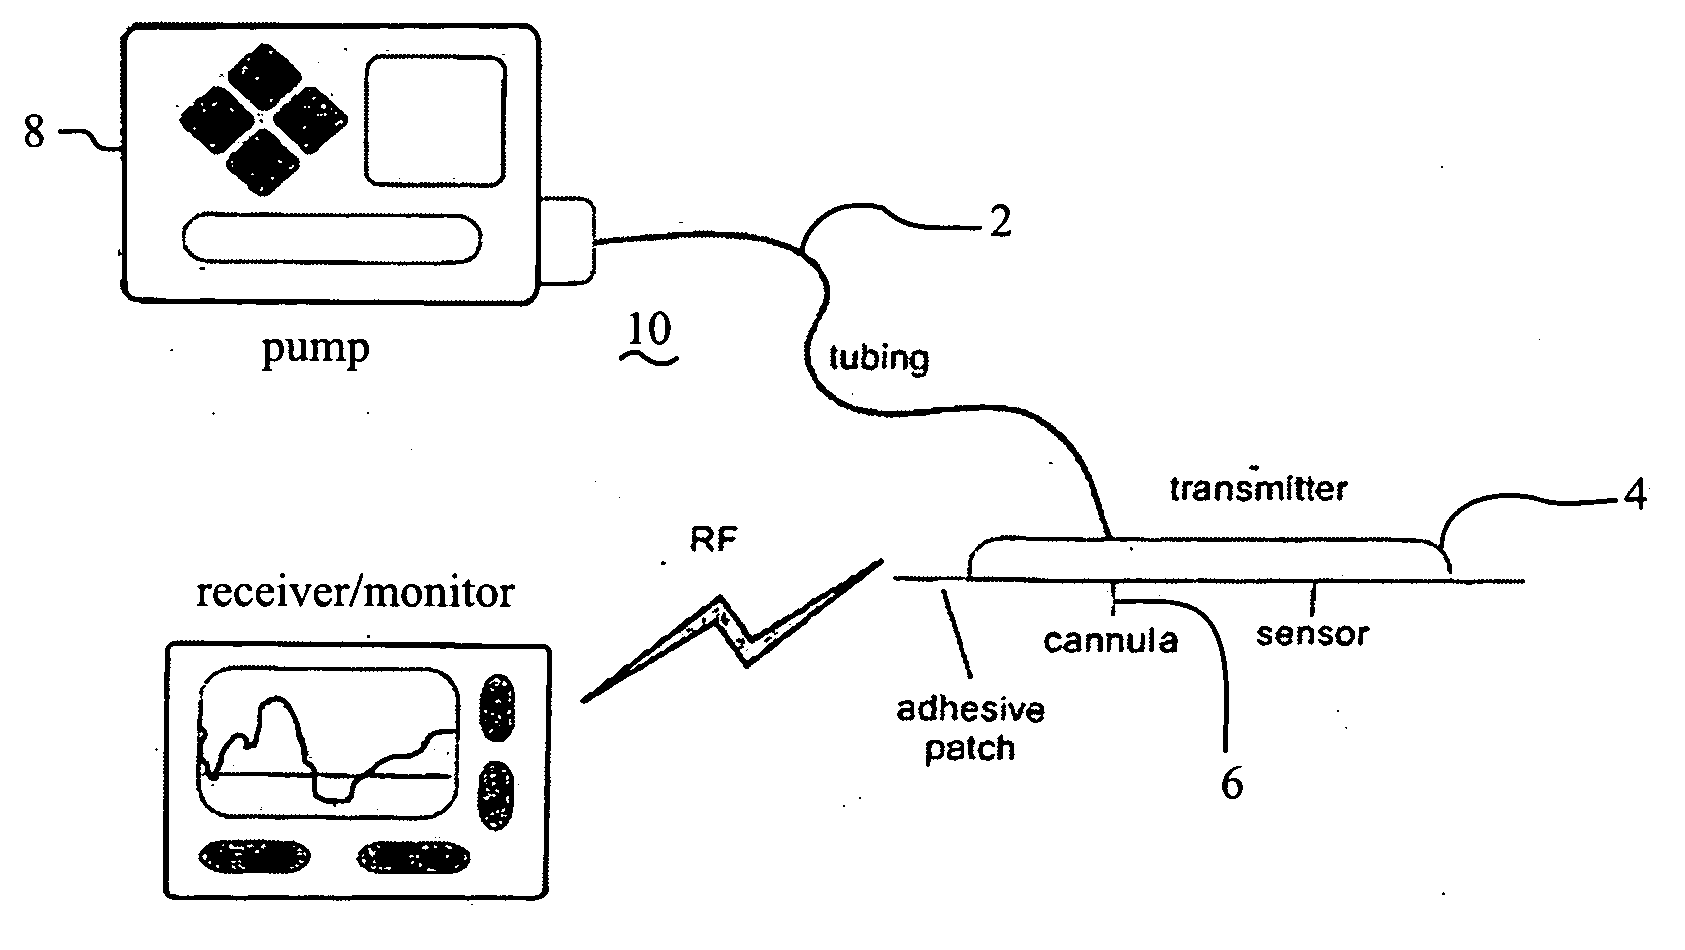 Infusion sets for the delivery of a therapeutic substance to a patient